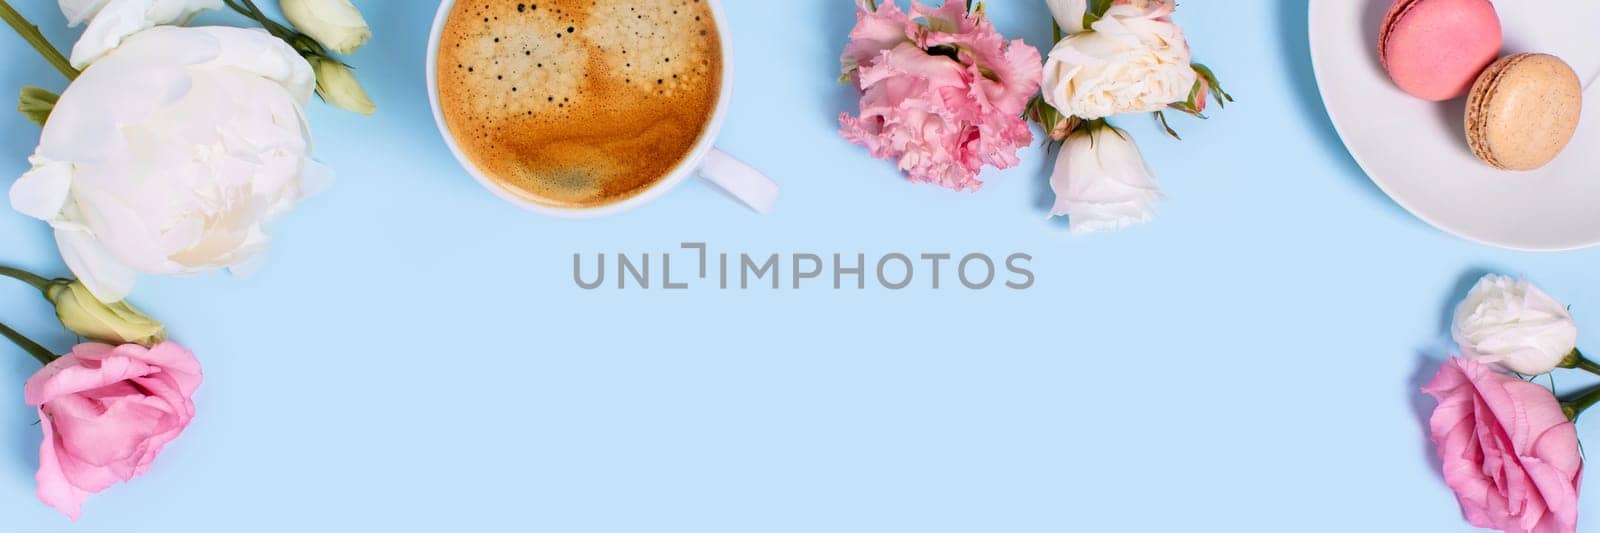 Blue background with macaroons and a Cup of coffee surrounded by peonies and roses. Top view with space for your text.